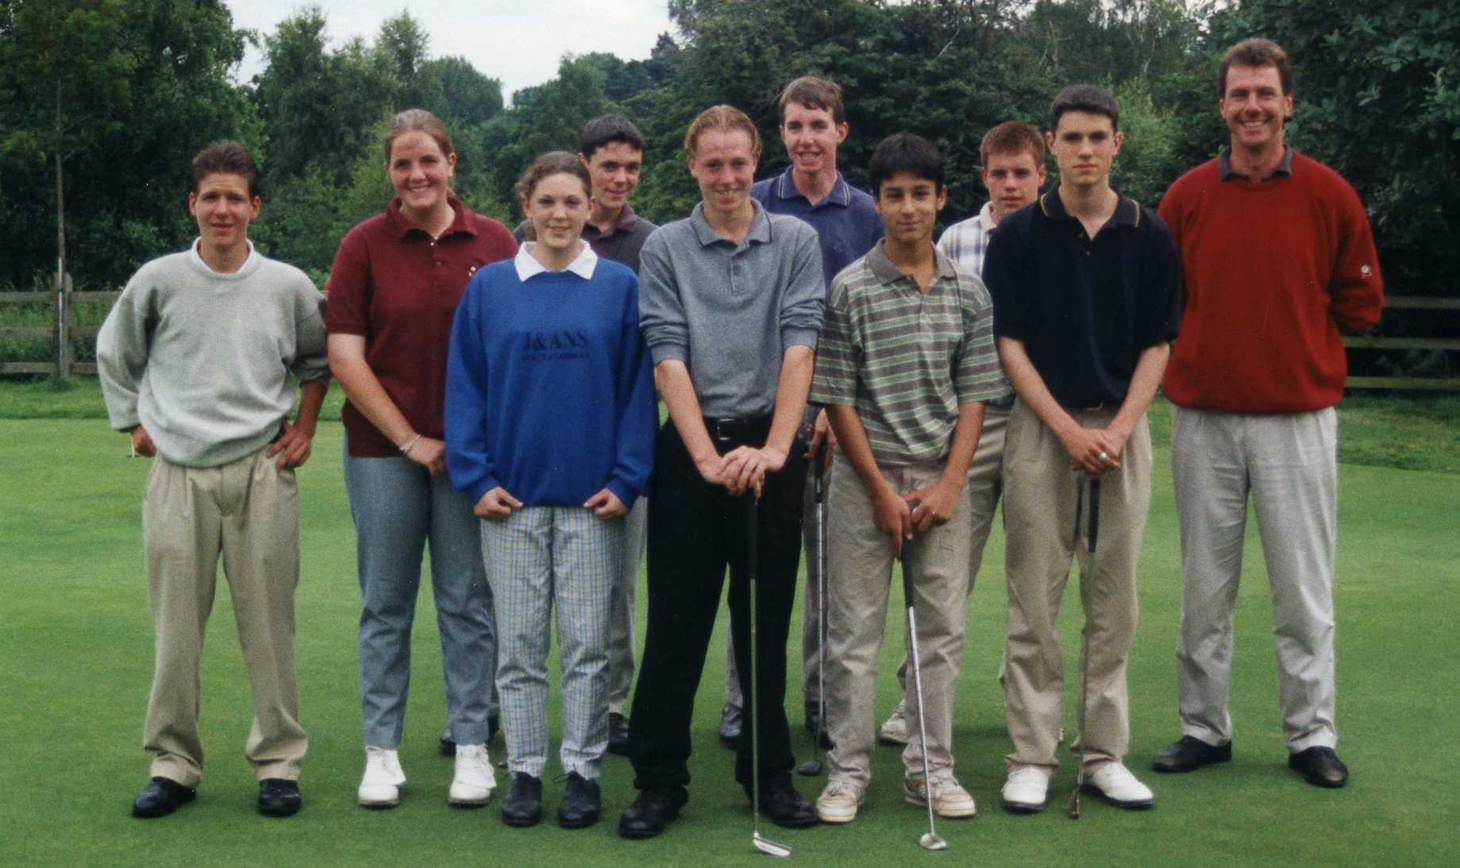 Did an introduction to golf at RGS result in a lifelong love of the sport? Is anyone from this group (circa 1998/99) still playing?